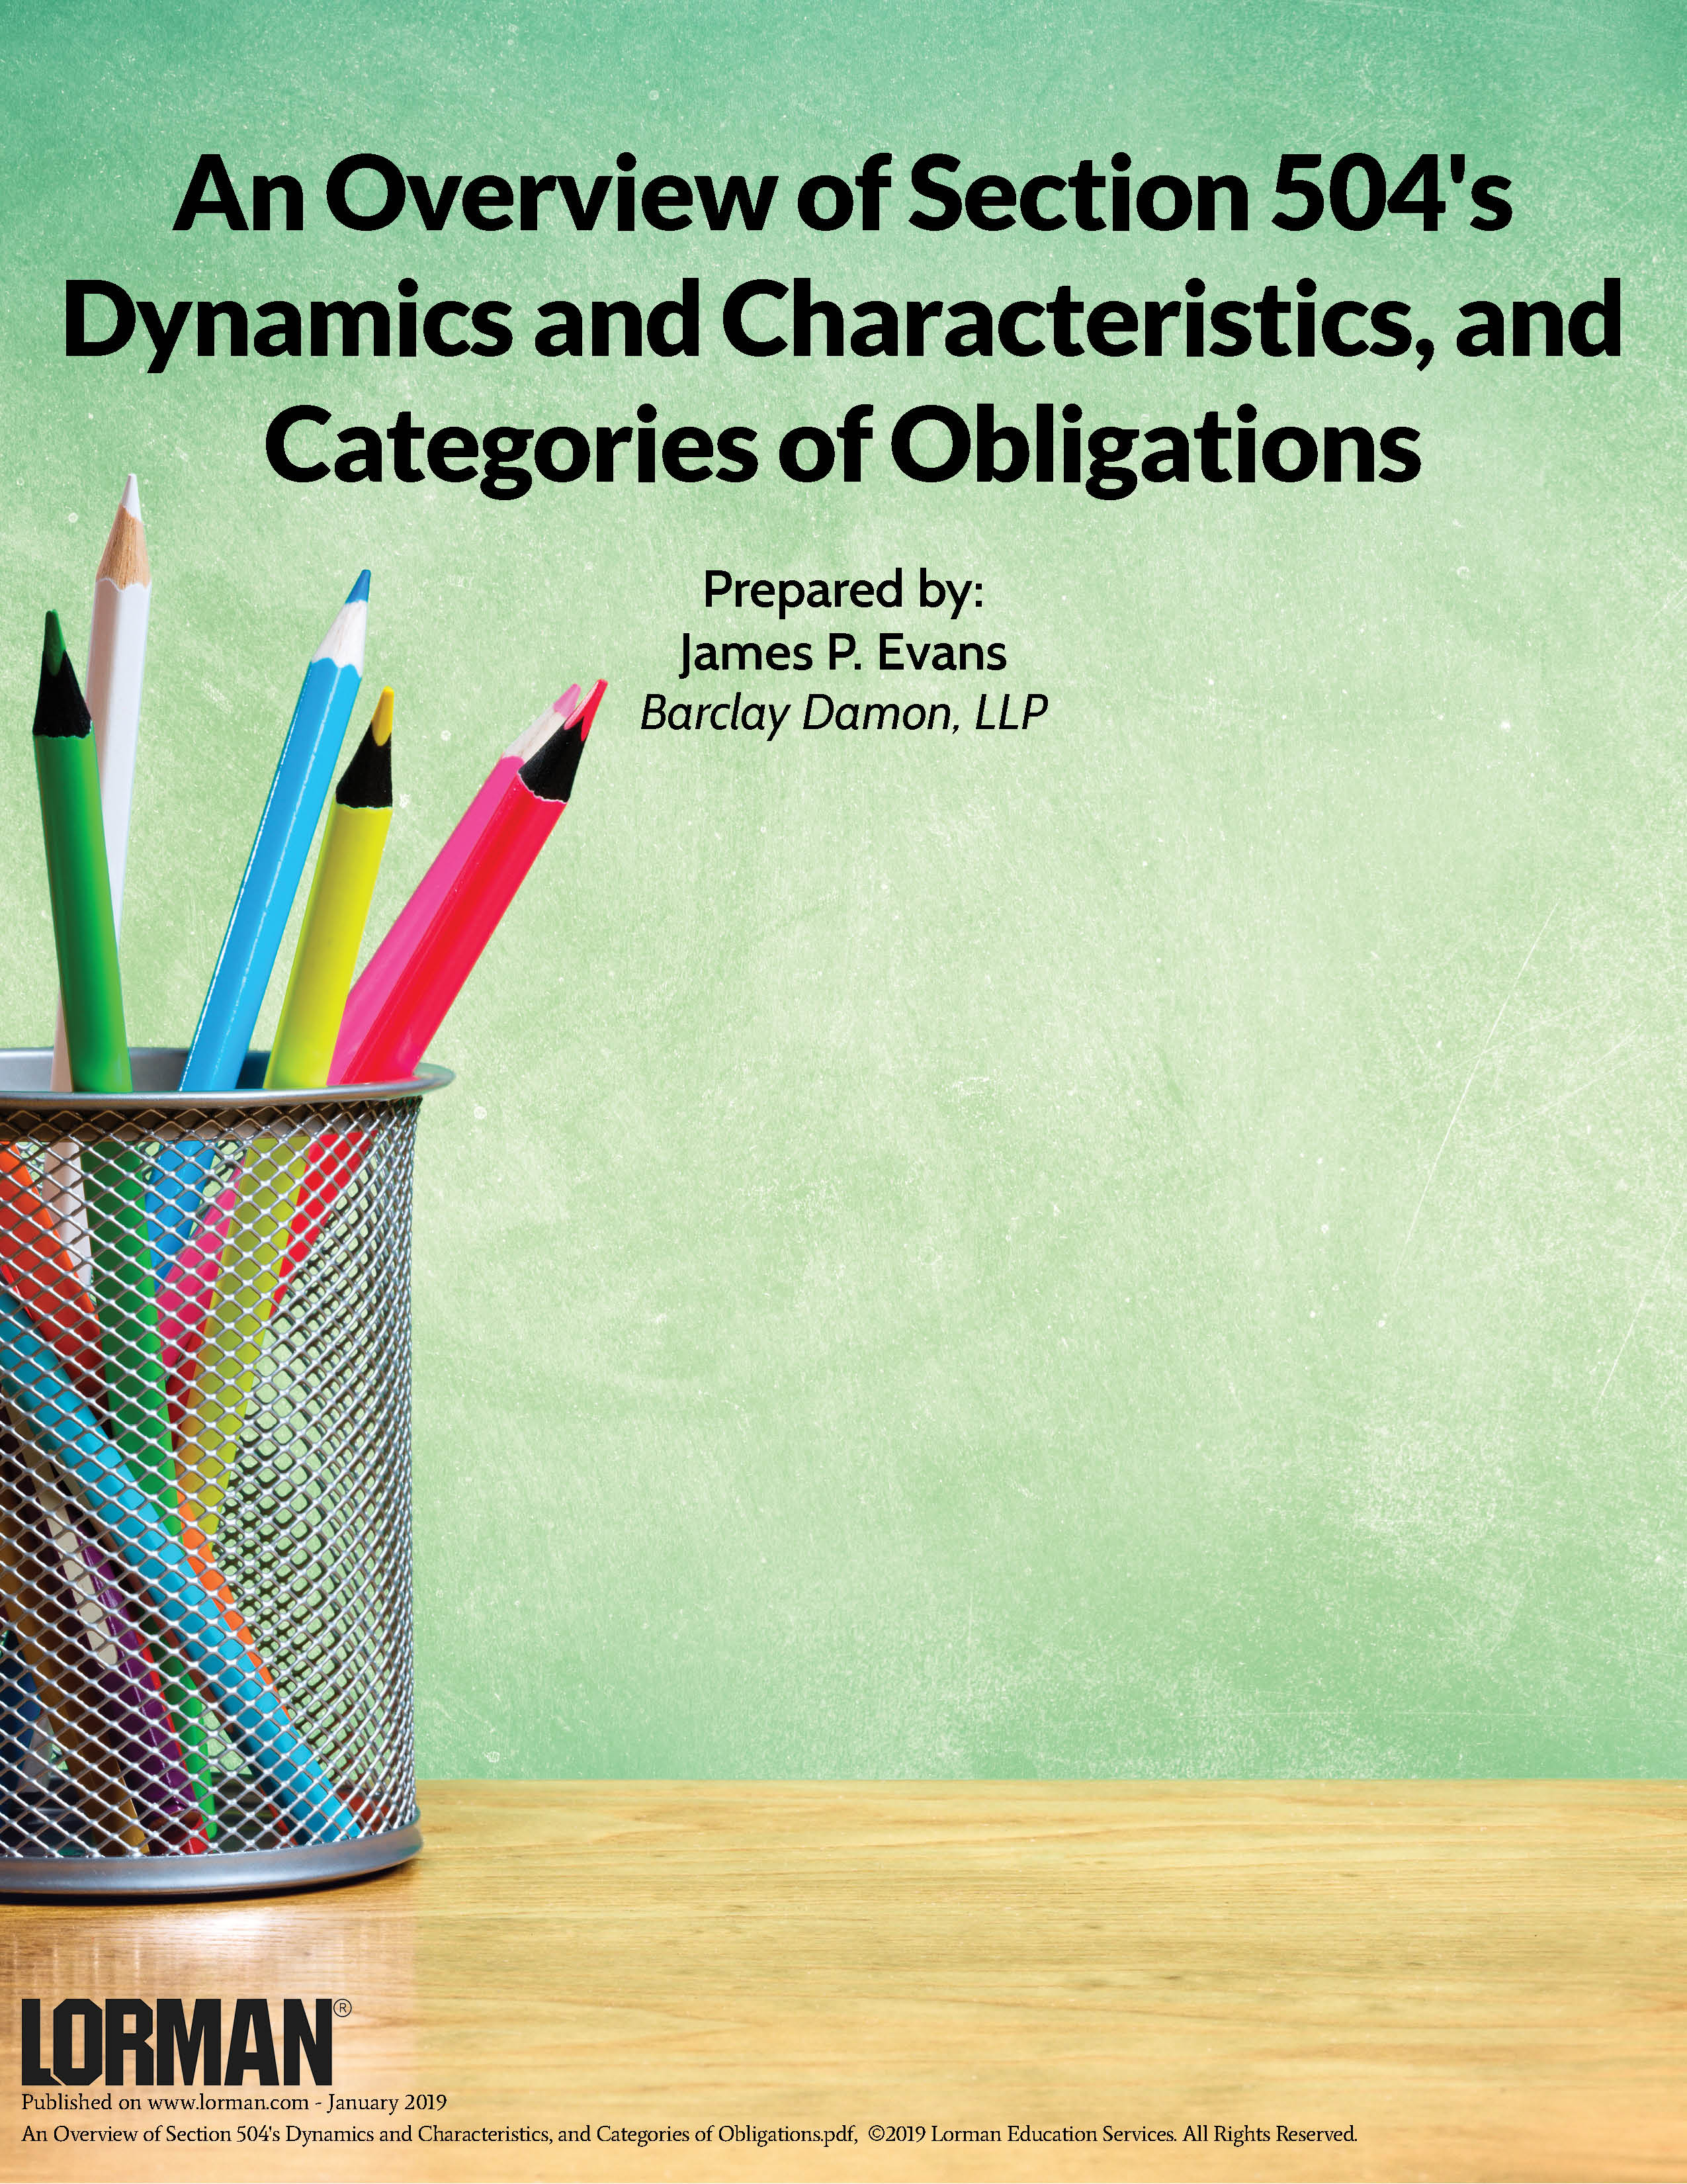 An Overview of Section 504's Dynamics and Characteristics, and Categories of Obligations